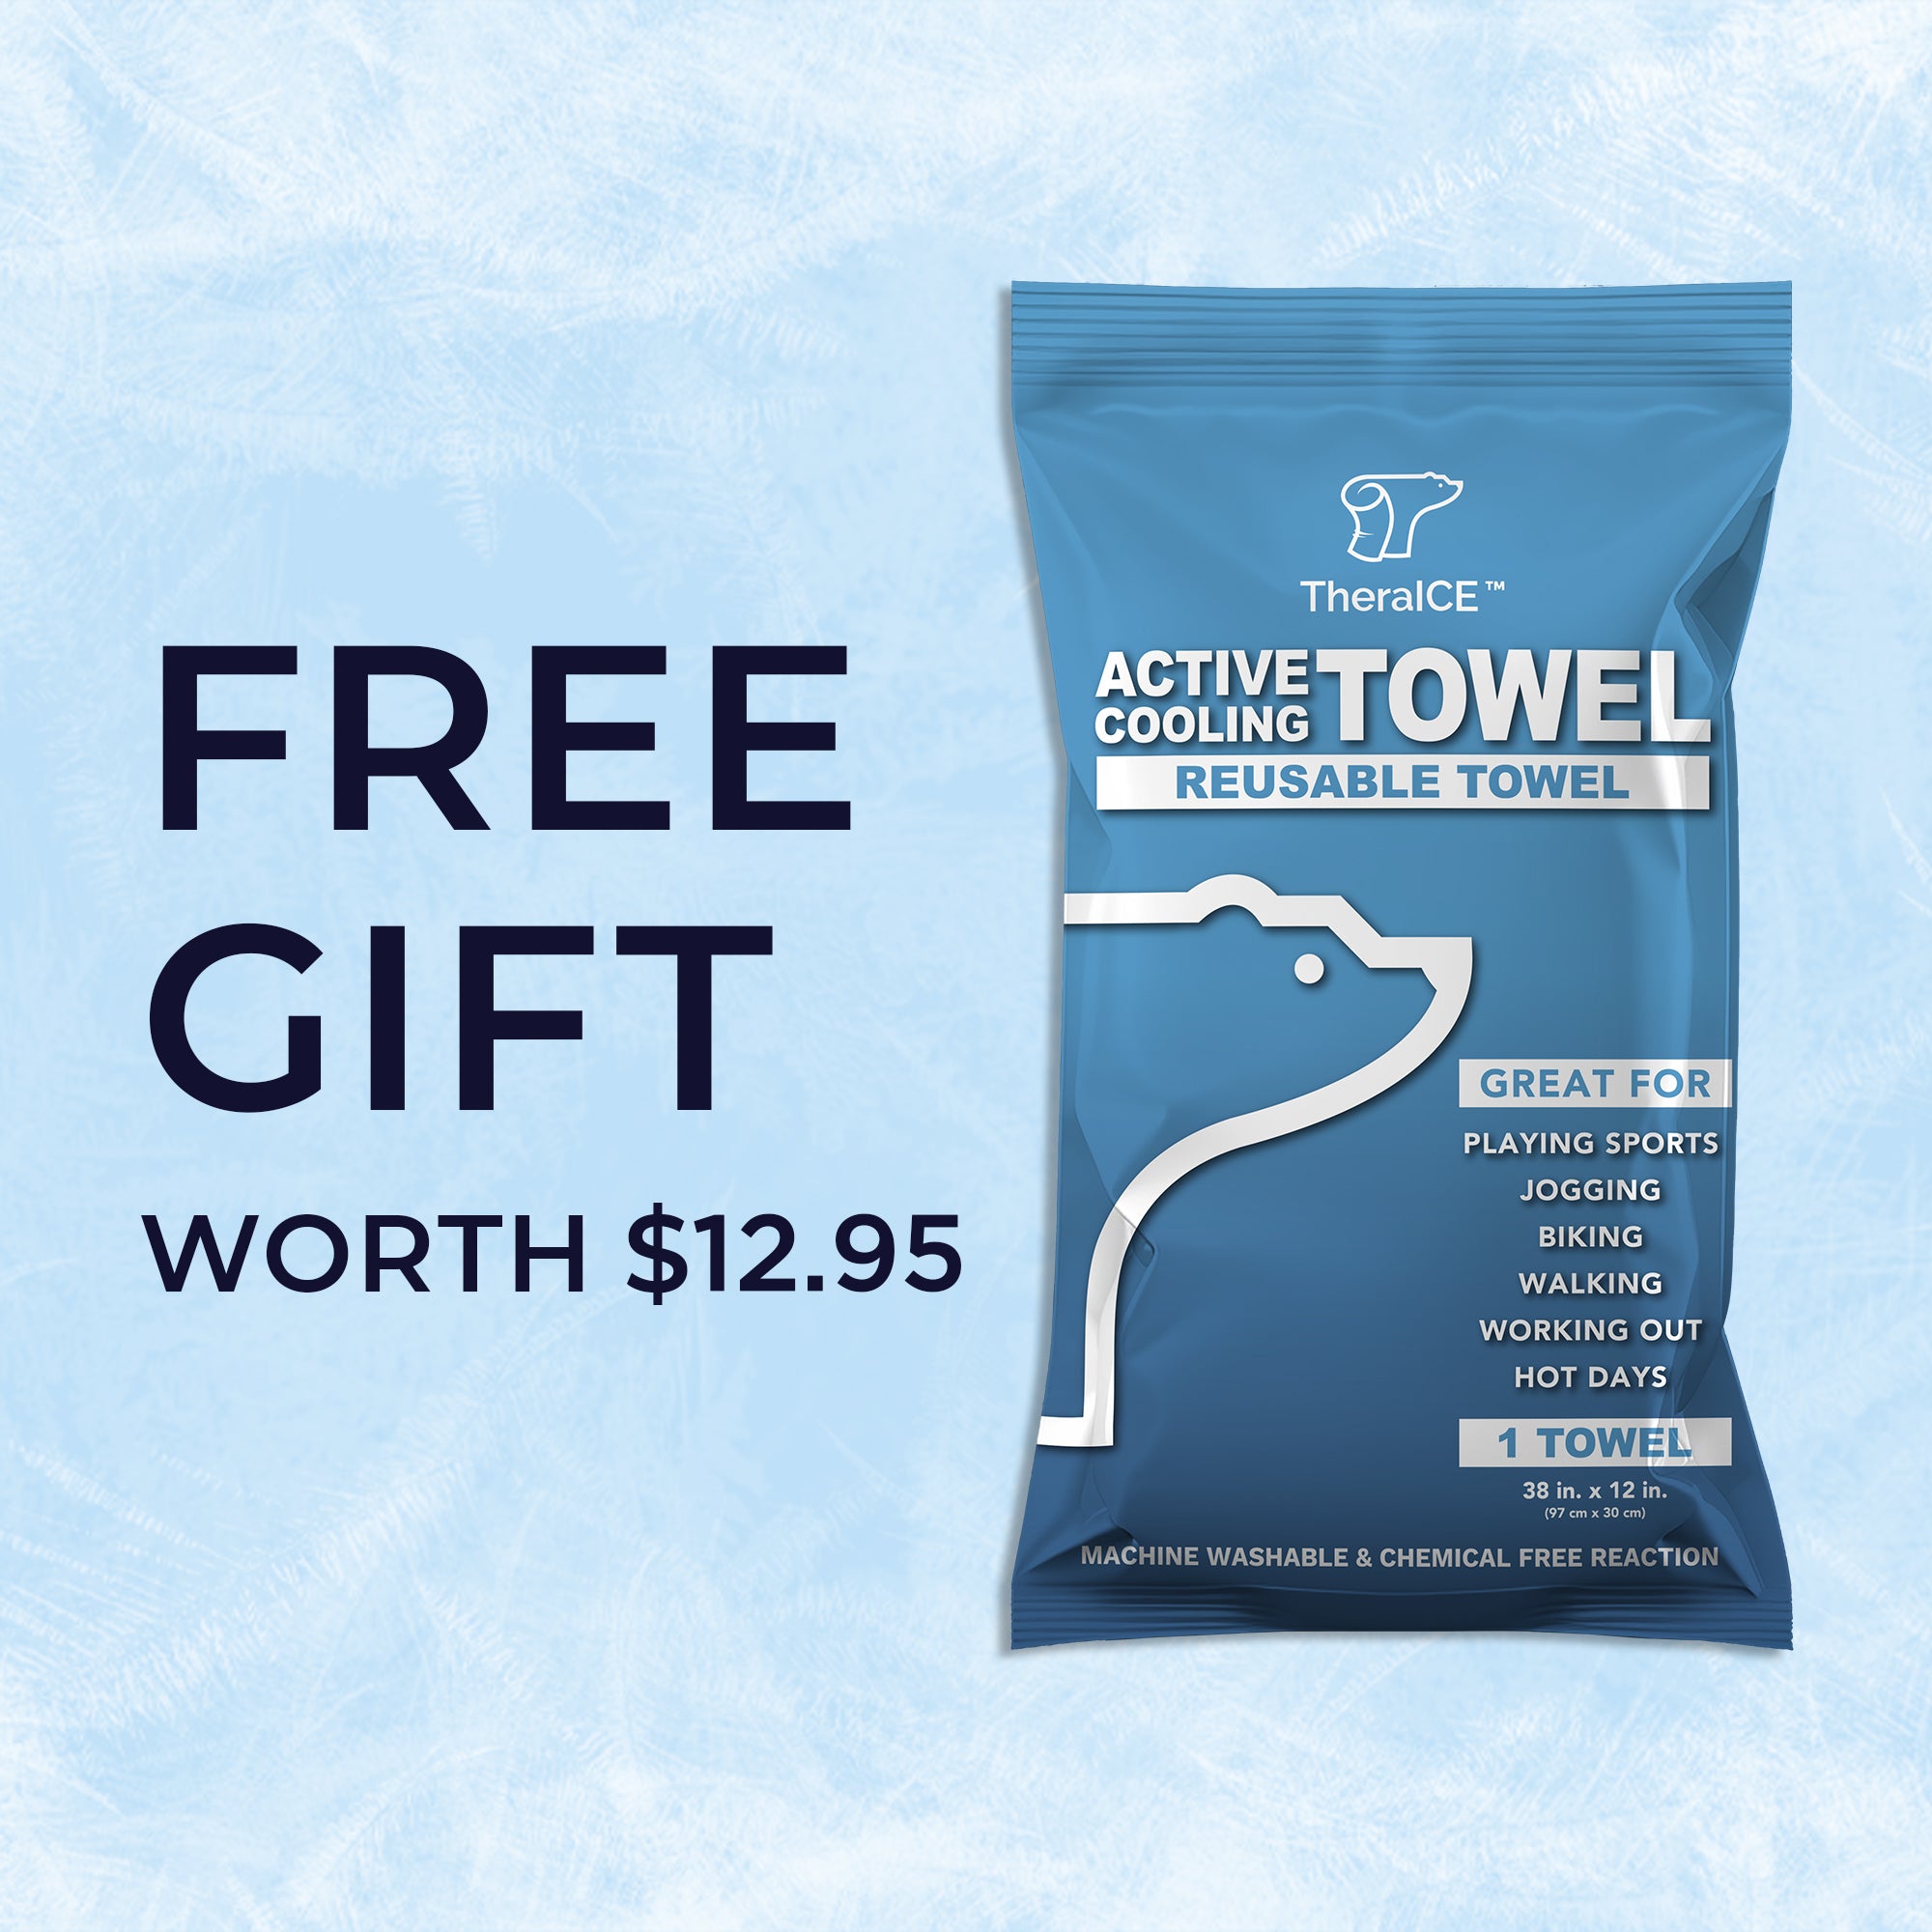 FREE GIFT TheraICE Active Cooling Towel